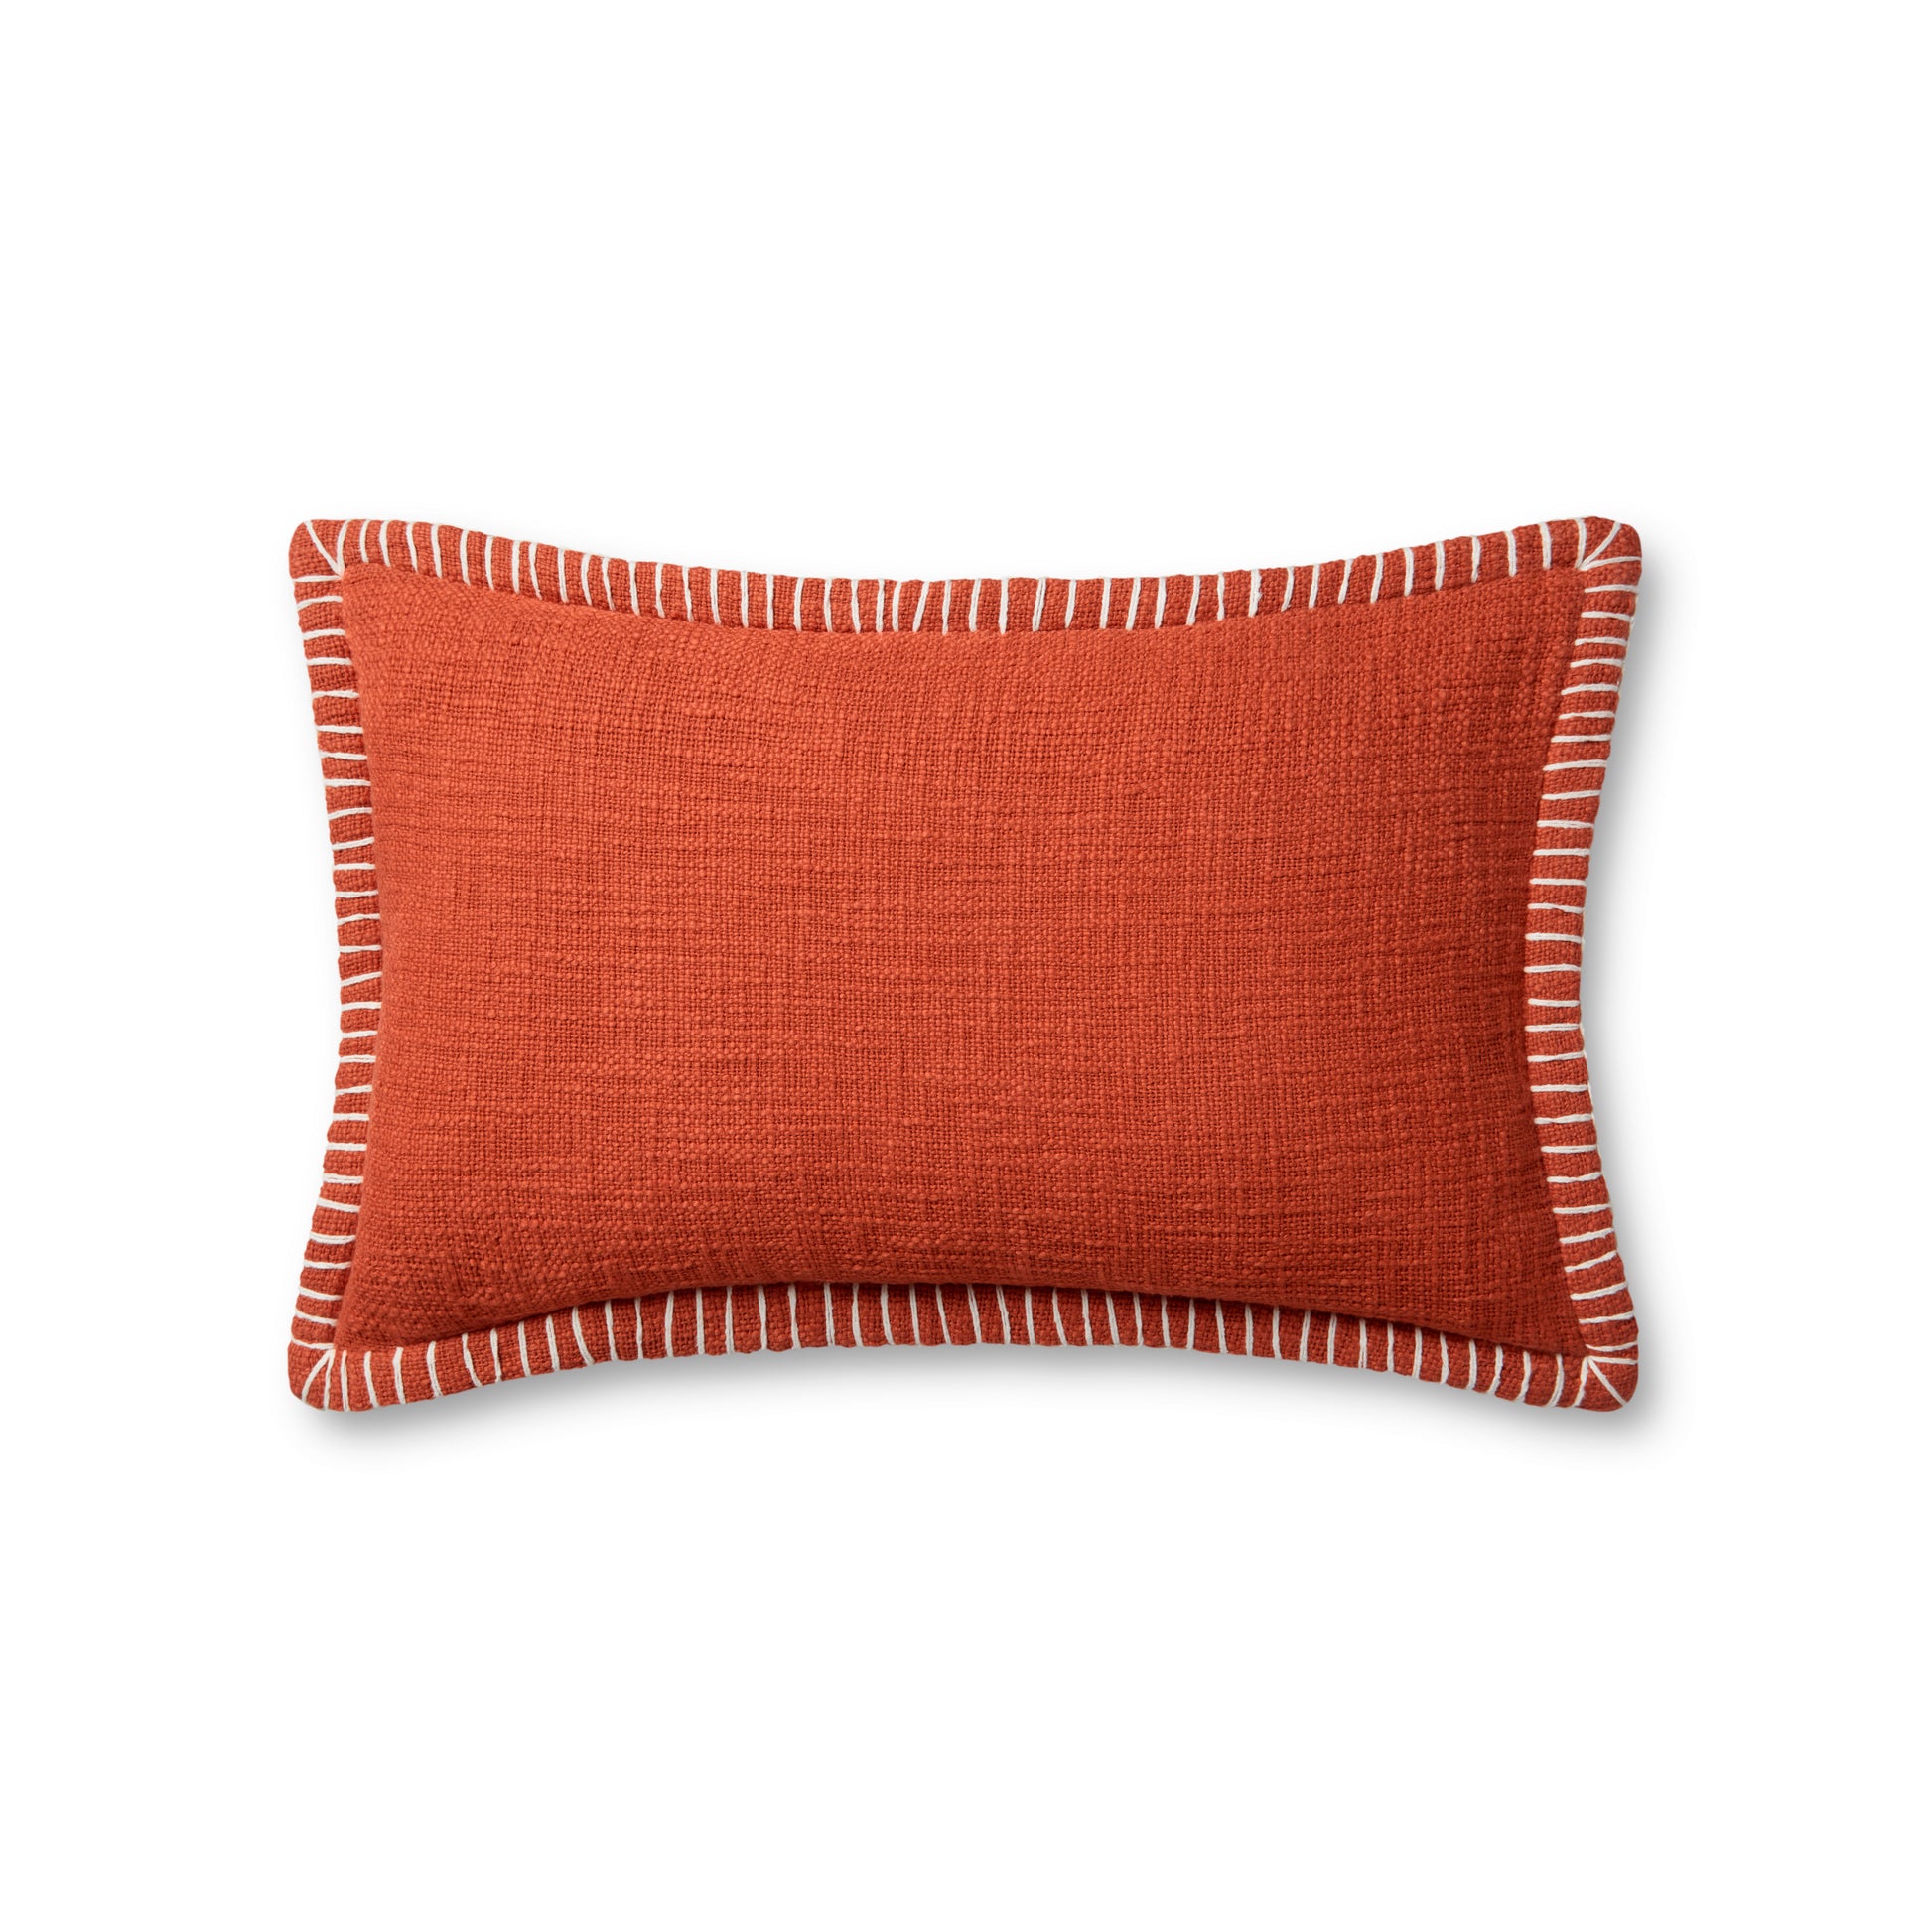 Photo of a pillow;  PLL0109 Orange 13'' x 21'' Cover w/Poly Pillow